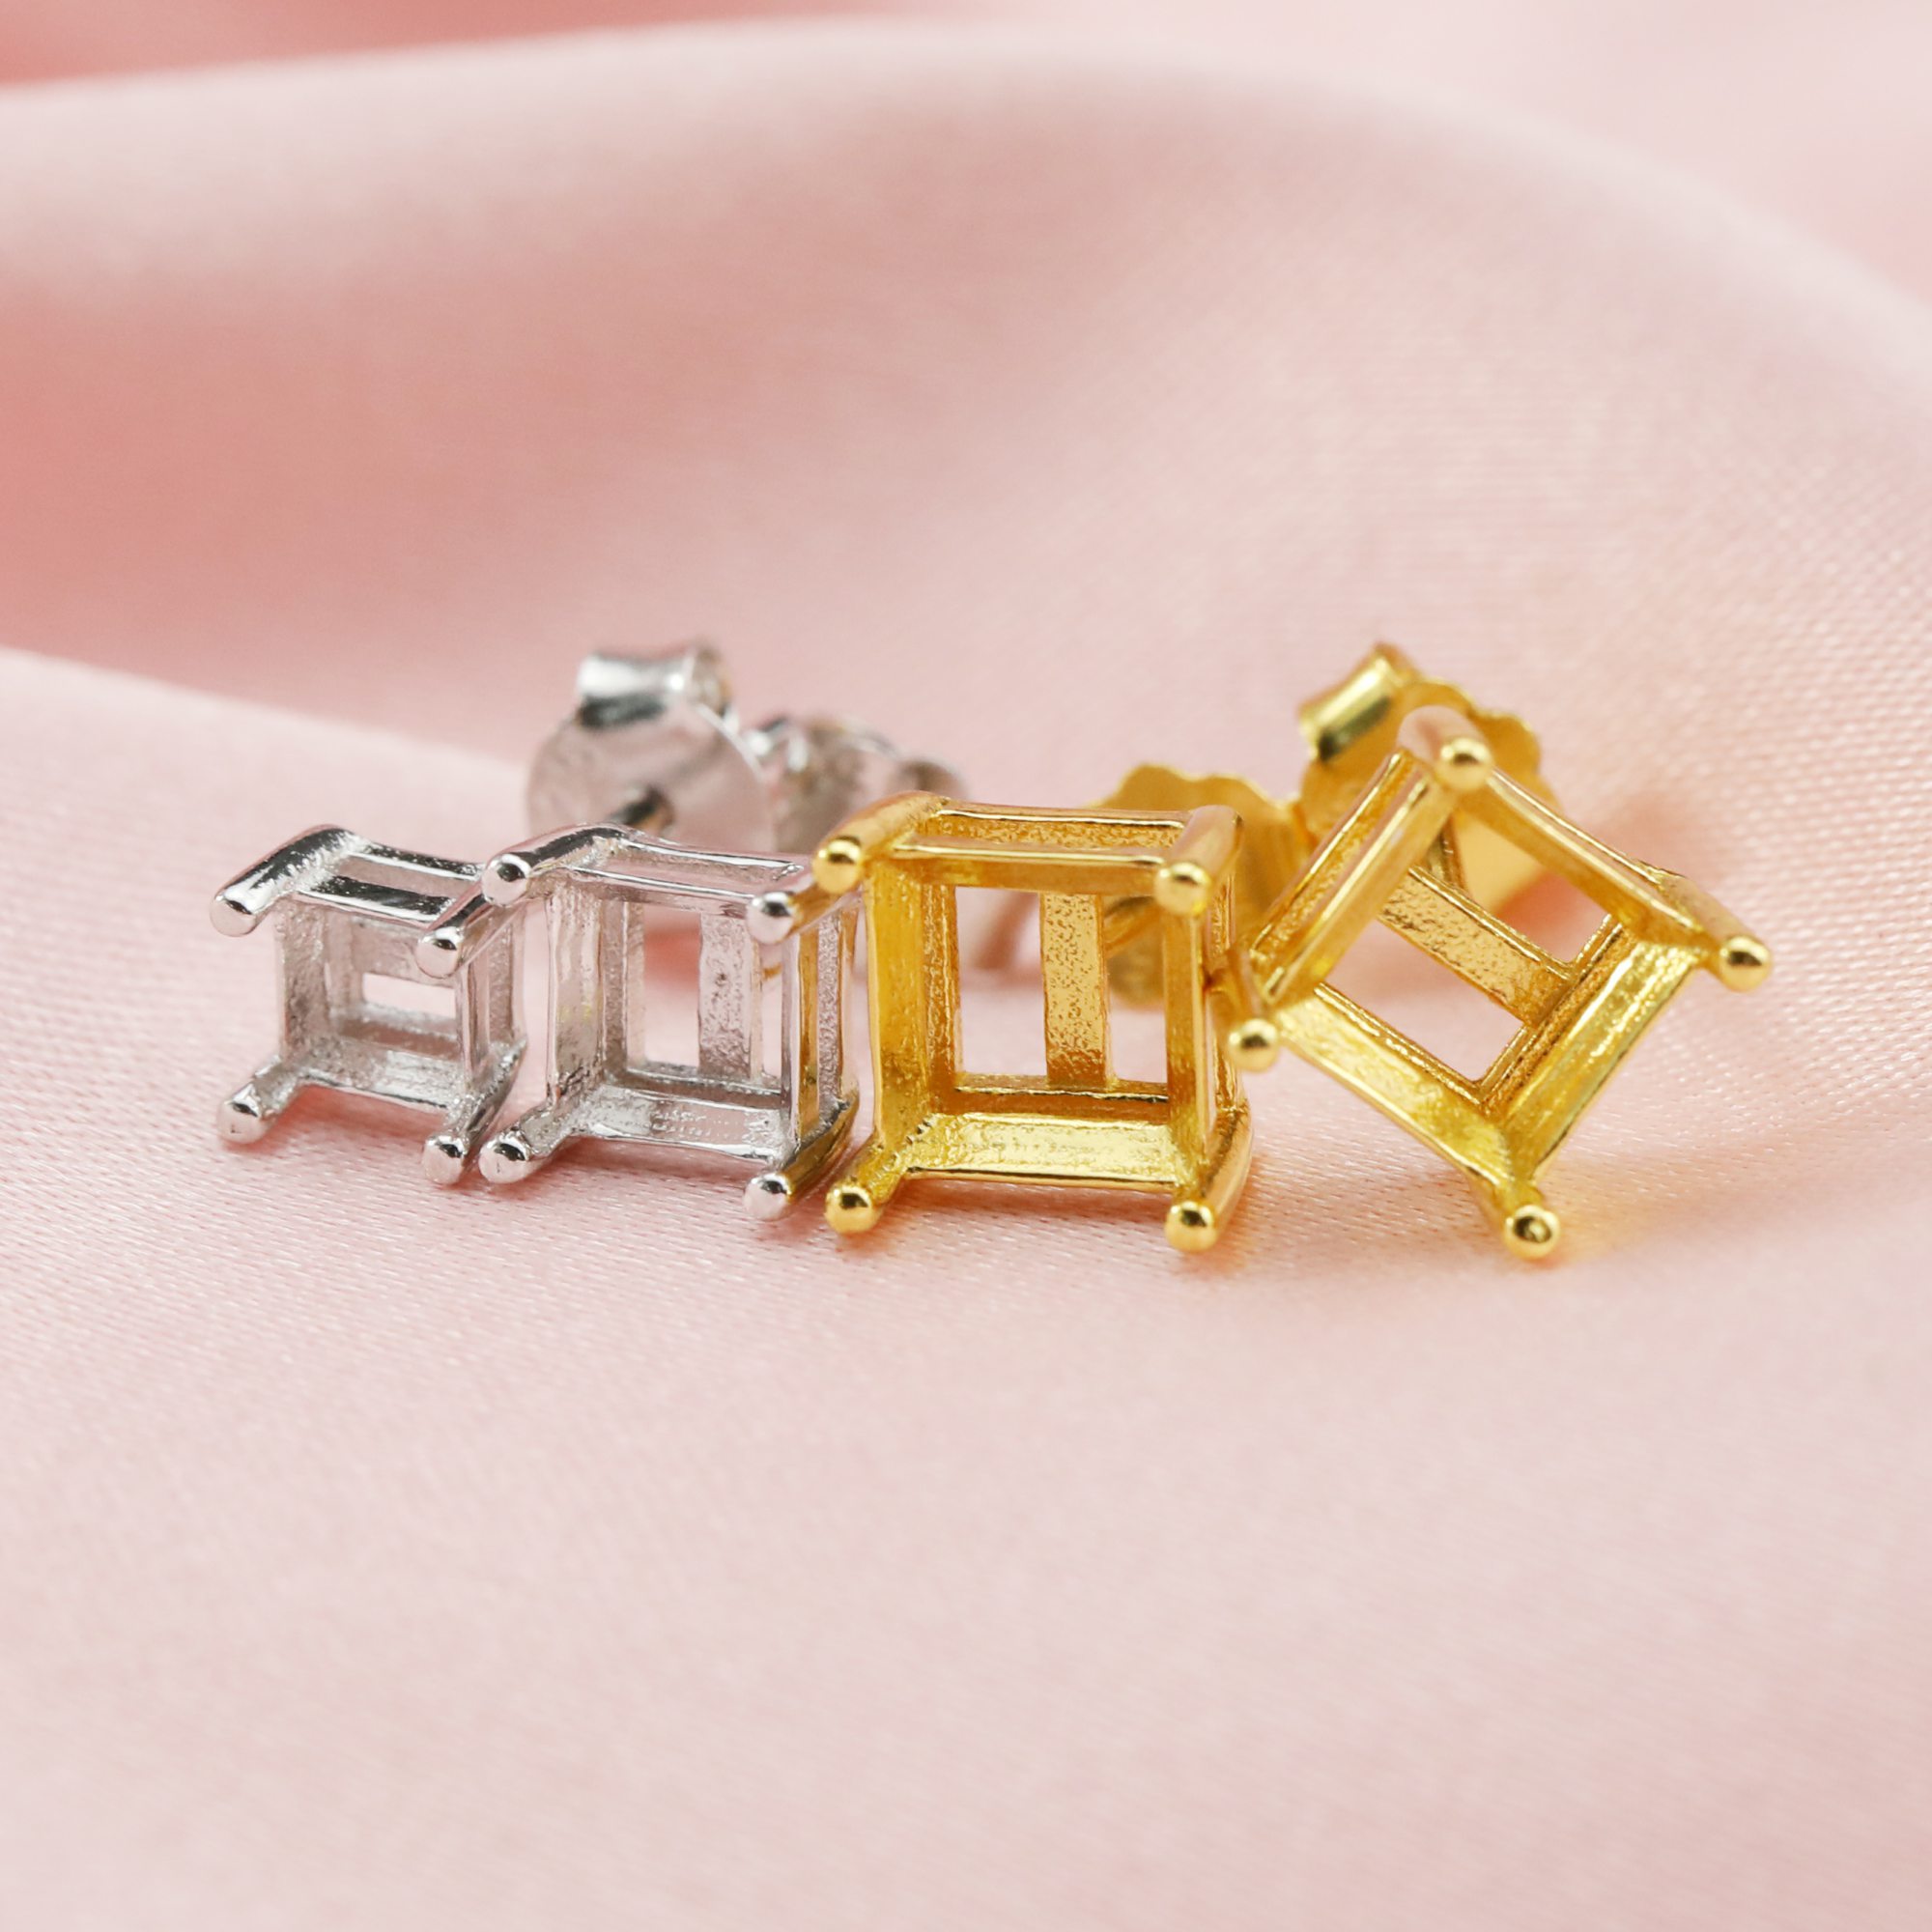 4-8MM Princess Cut Square Prongs Studs Earrings Settings Solid 14K/18K Gold for Gemstone DIY Supplies 1706023-1 - Click Image to Close